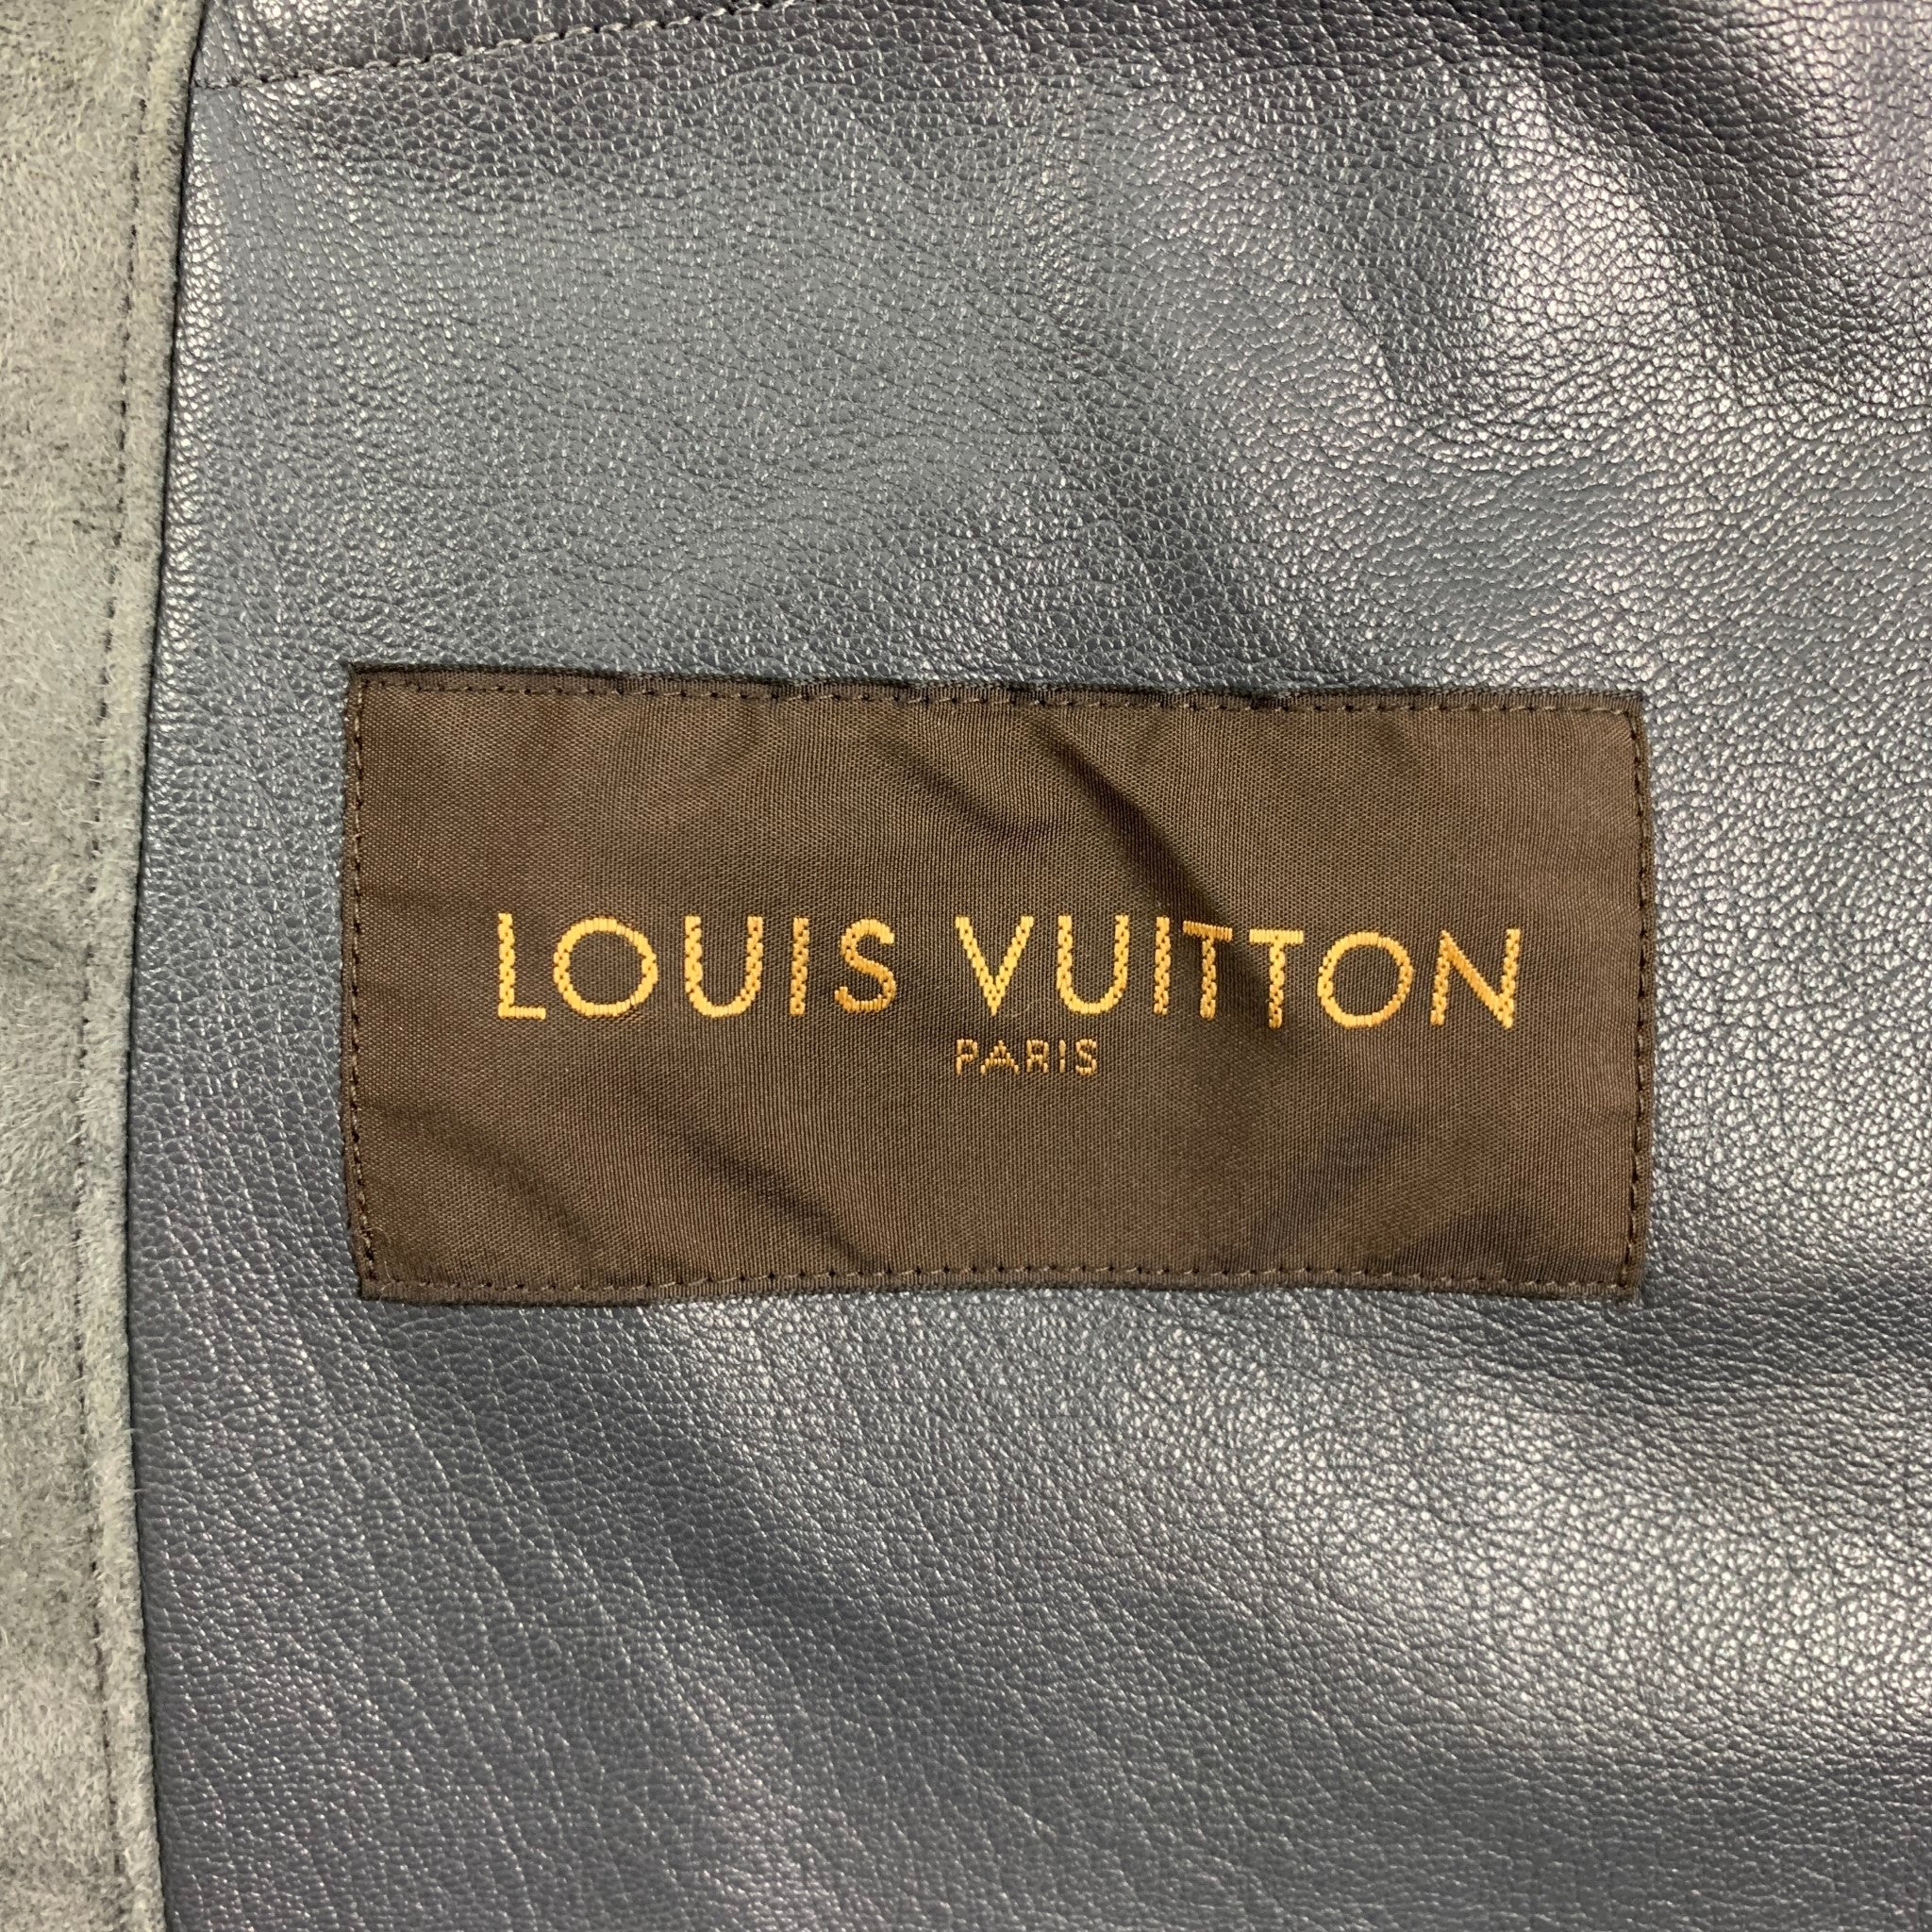 LOUIS VUITTON Size 44 Grey Suede Leather Zip Up Jacket